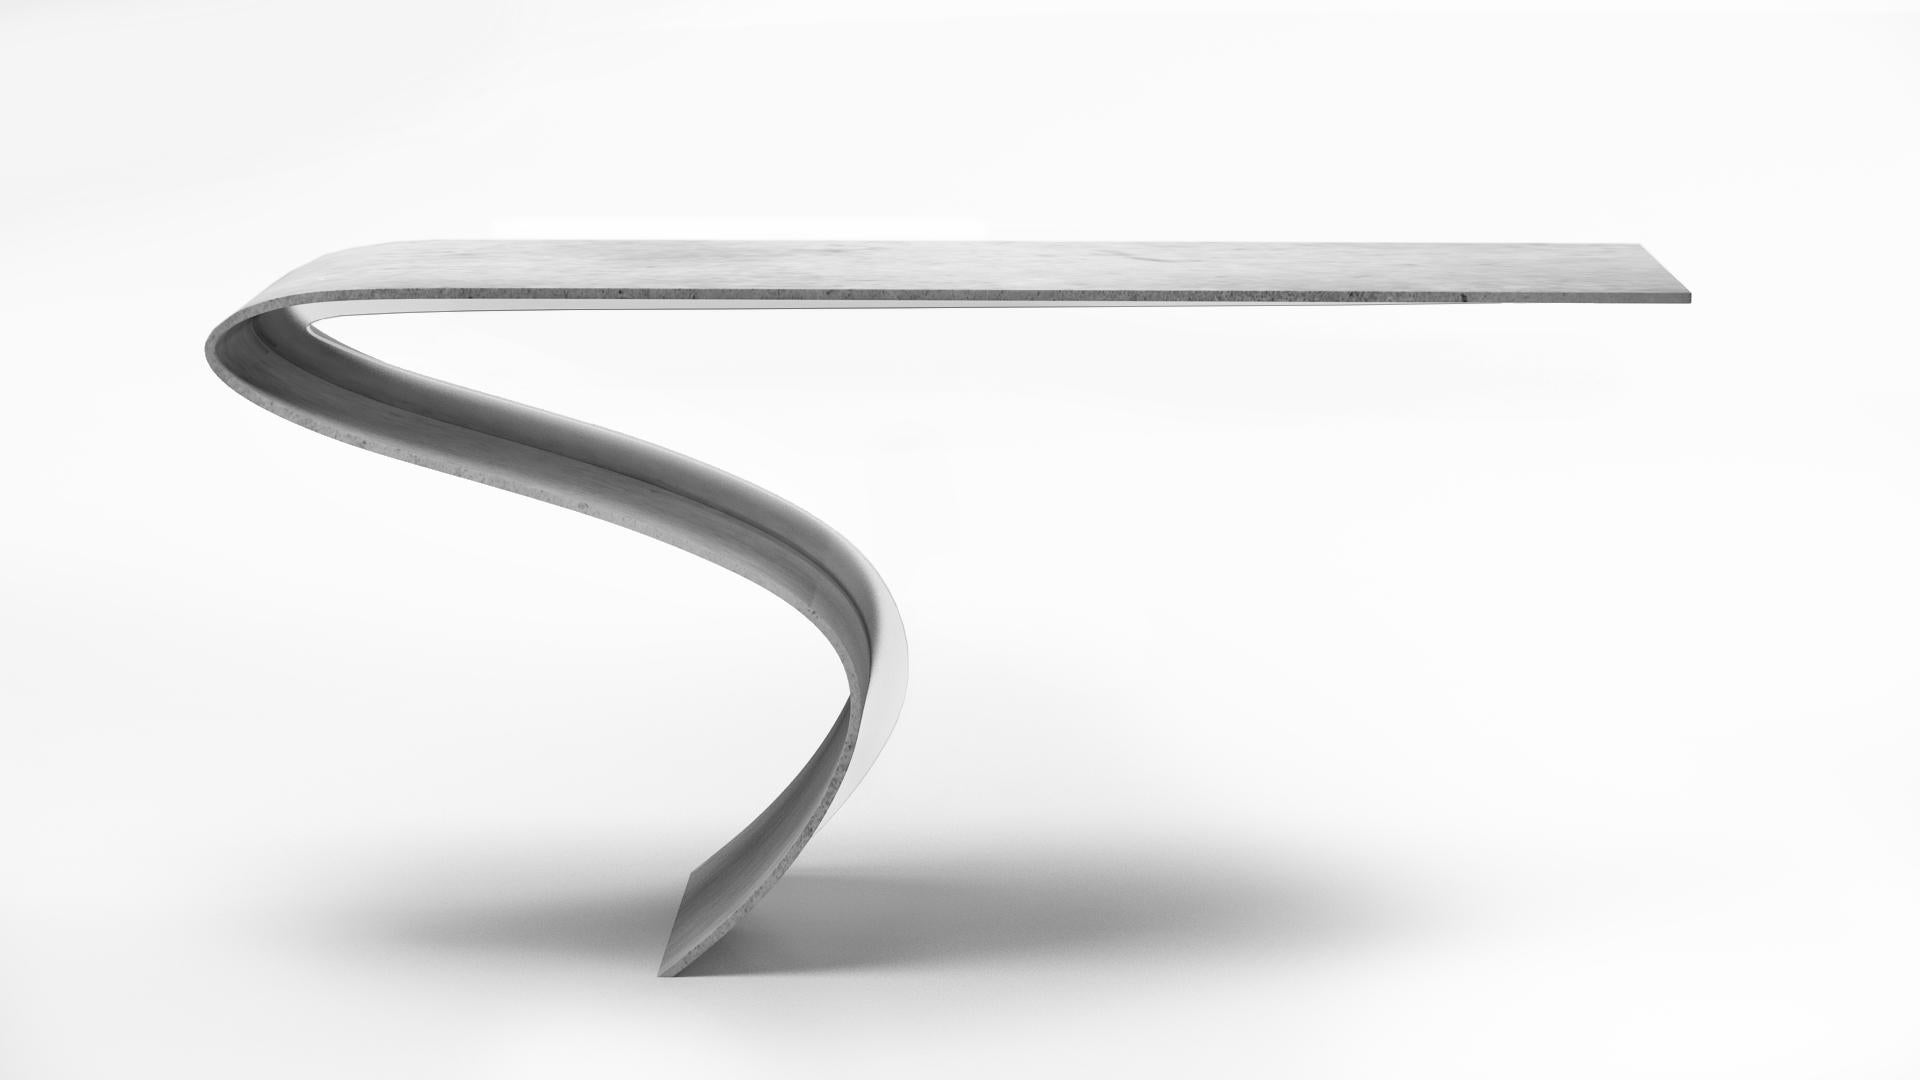 Enso table by Neal Aronowitz Design
Dimensions: D 43.2 x W 81.3 x H 81.3
Materials: concrete Canvas, cement pigments, stainless steel.
Size and color modifications are available. 

The Enso Table draws inspiration from the disciplined creative